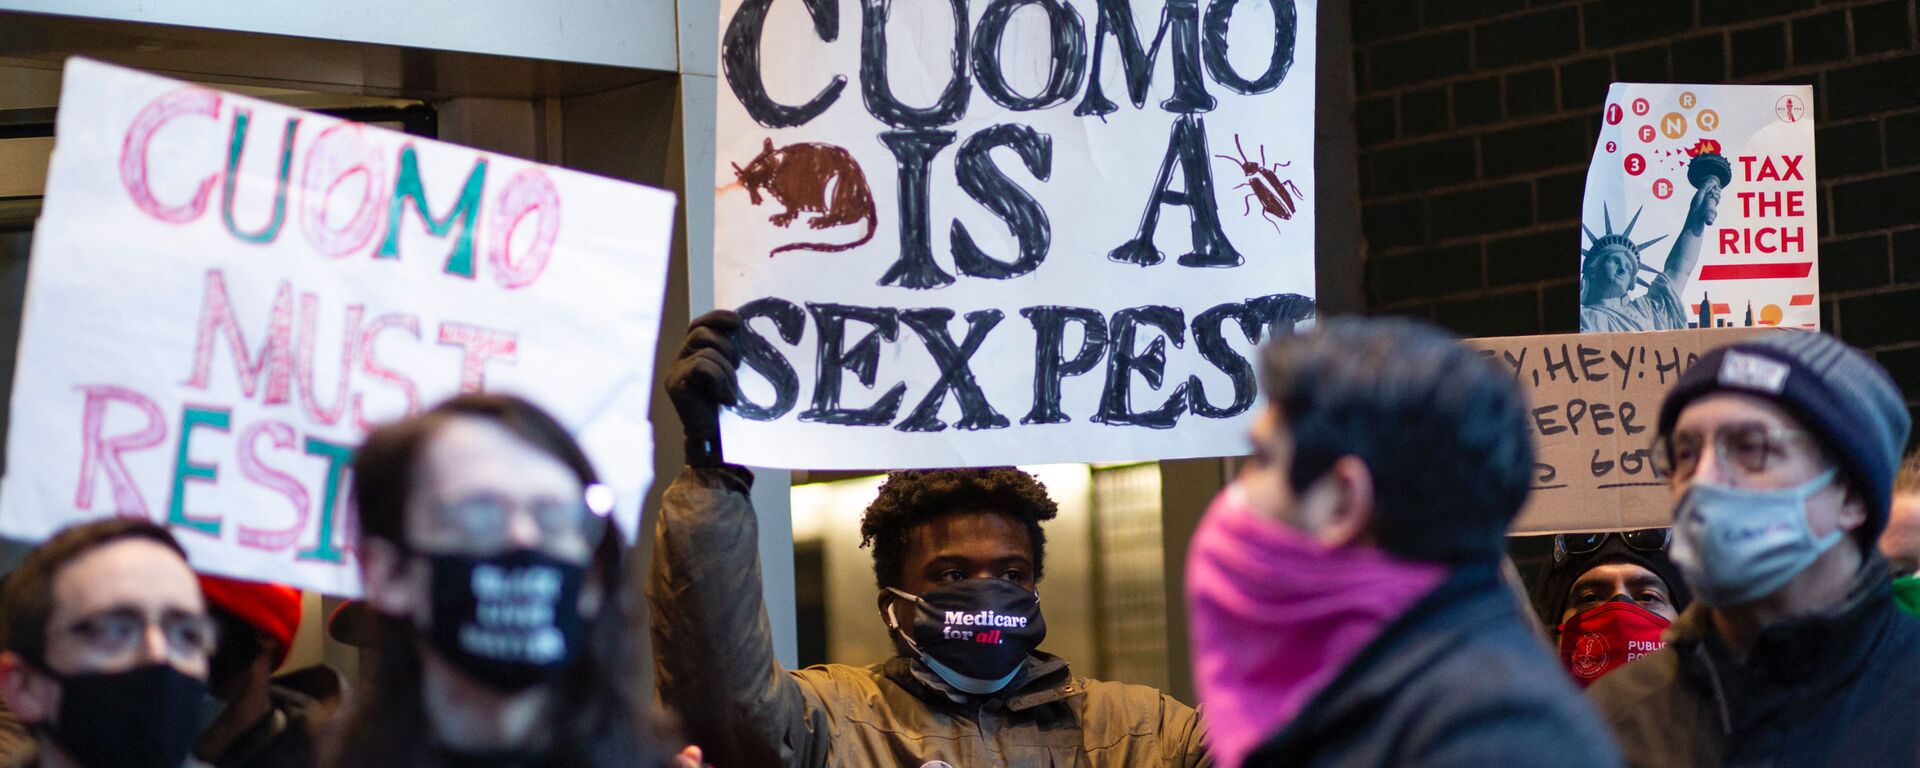 People attend a protest to demand New York Governor Andrew Cuomo's resignation after a third woman accused him of sexual harassment in New York City on March 2, 2021. - - Sputnik International, 1920, 06.08.2021